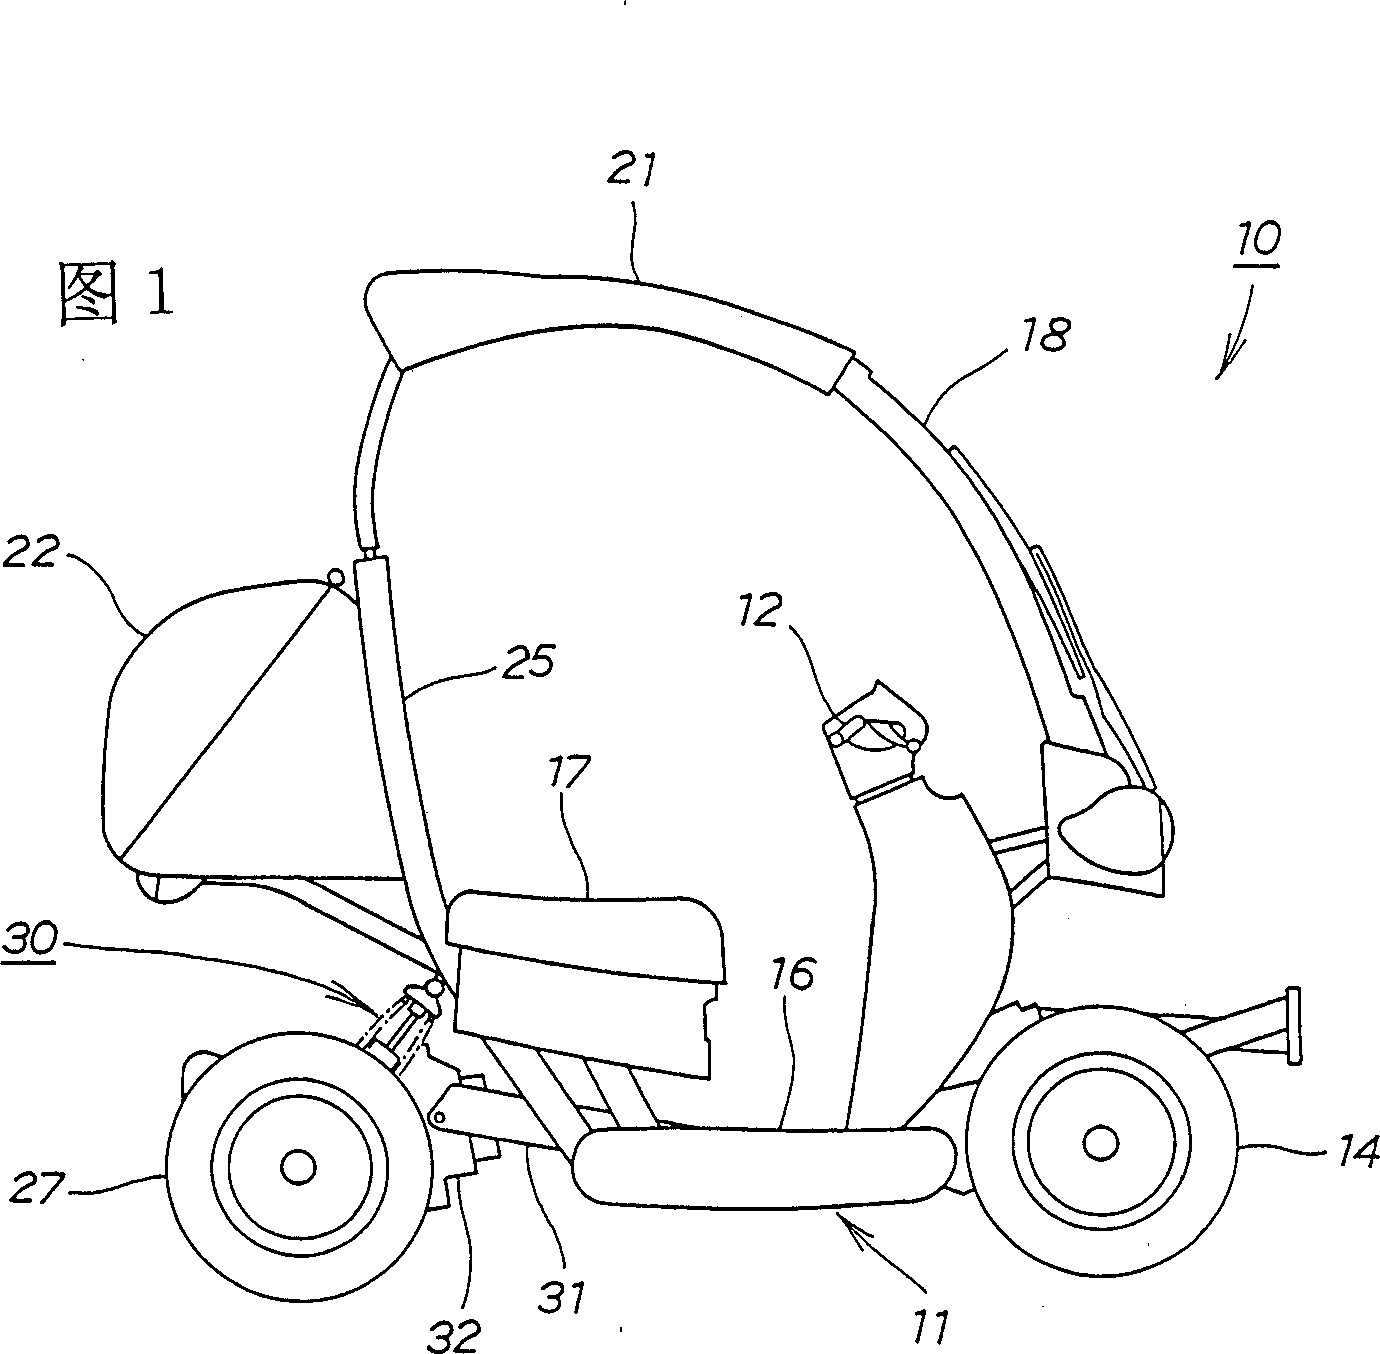 Rear wheel suspension device of cycle